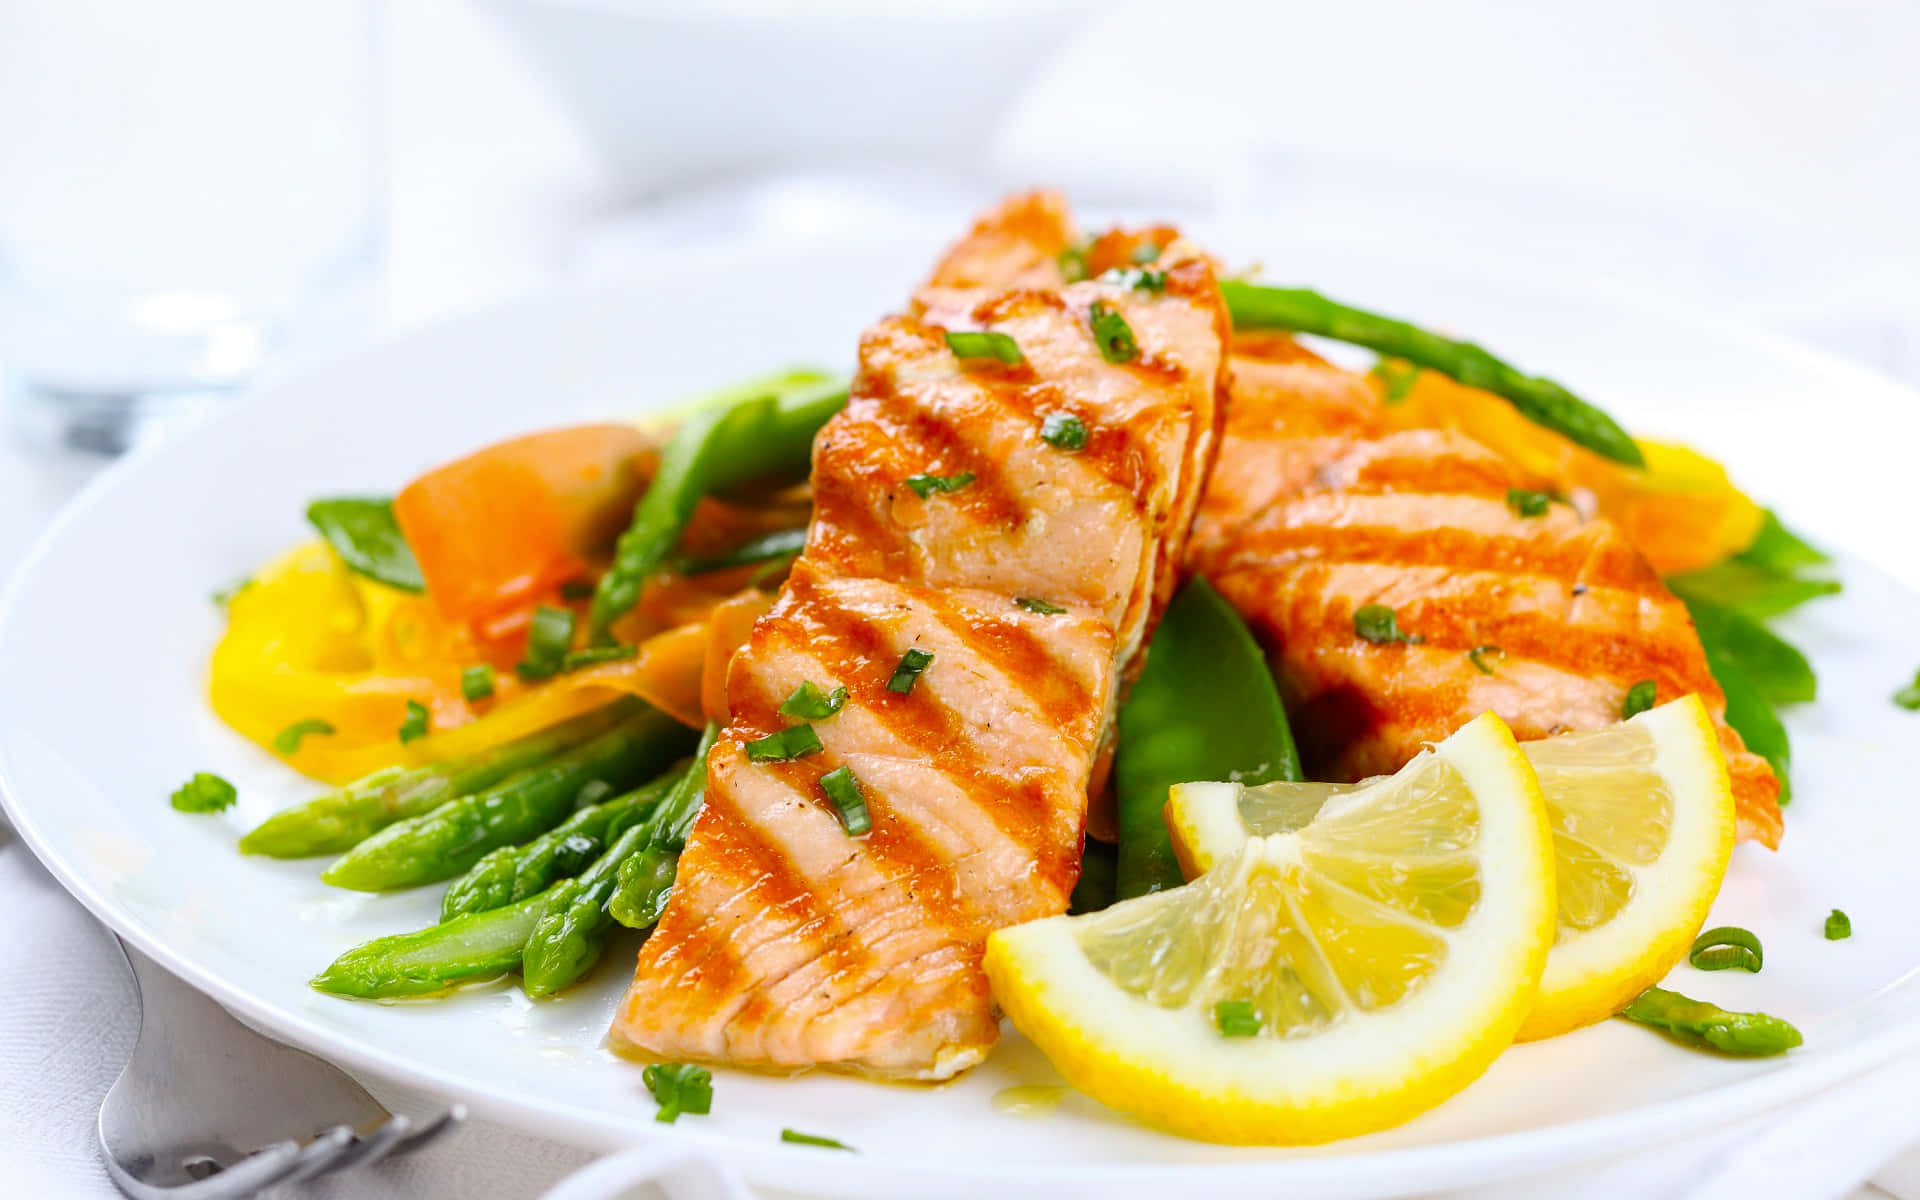 Salmon And Vegetables On A Plate Wallpaper